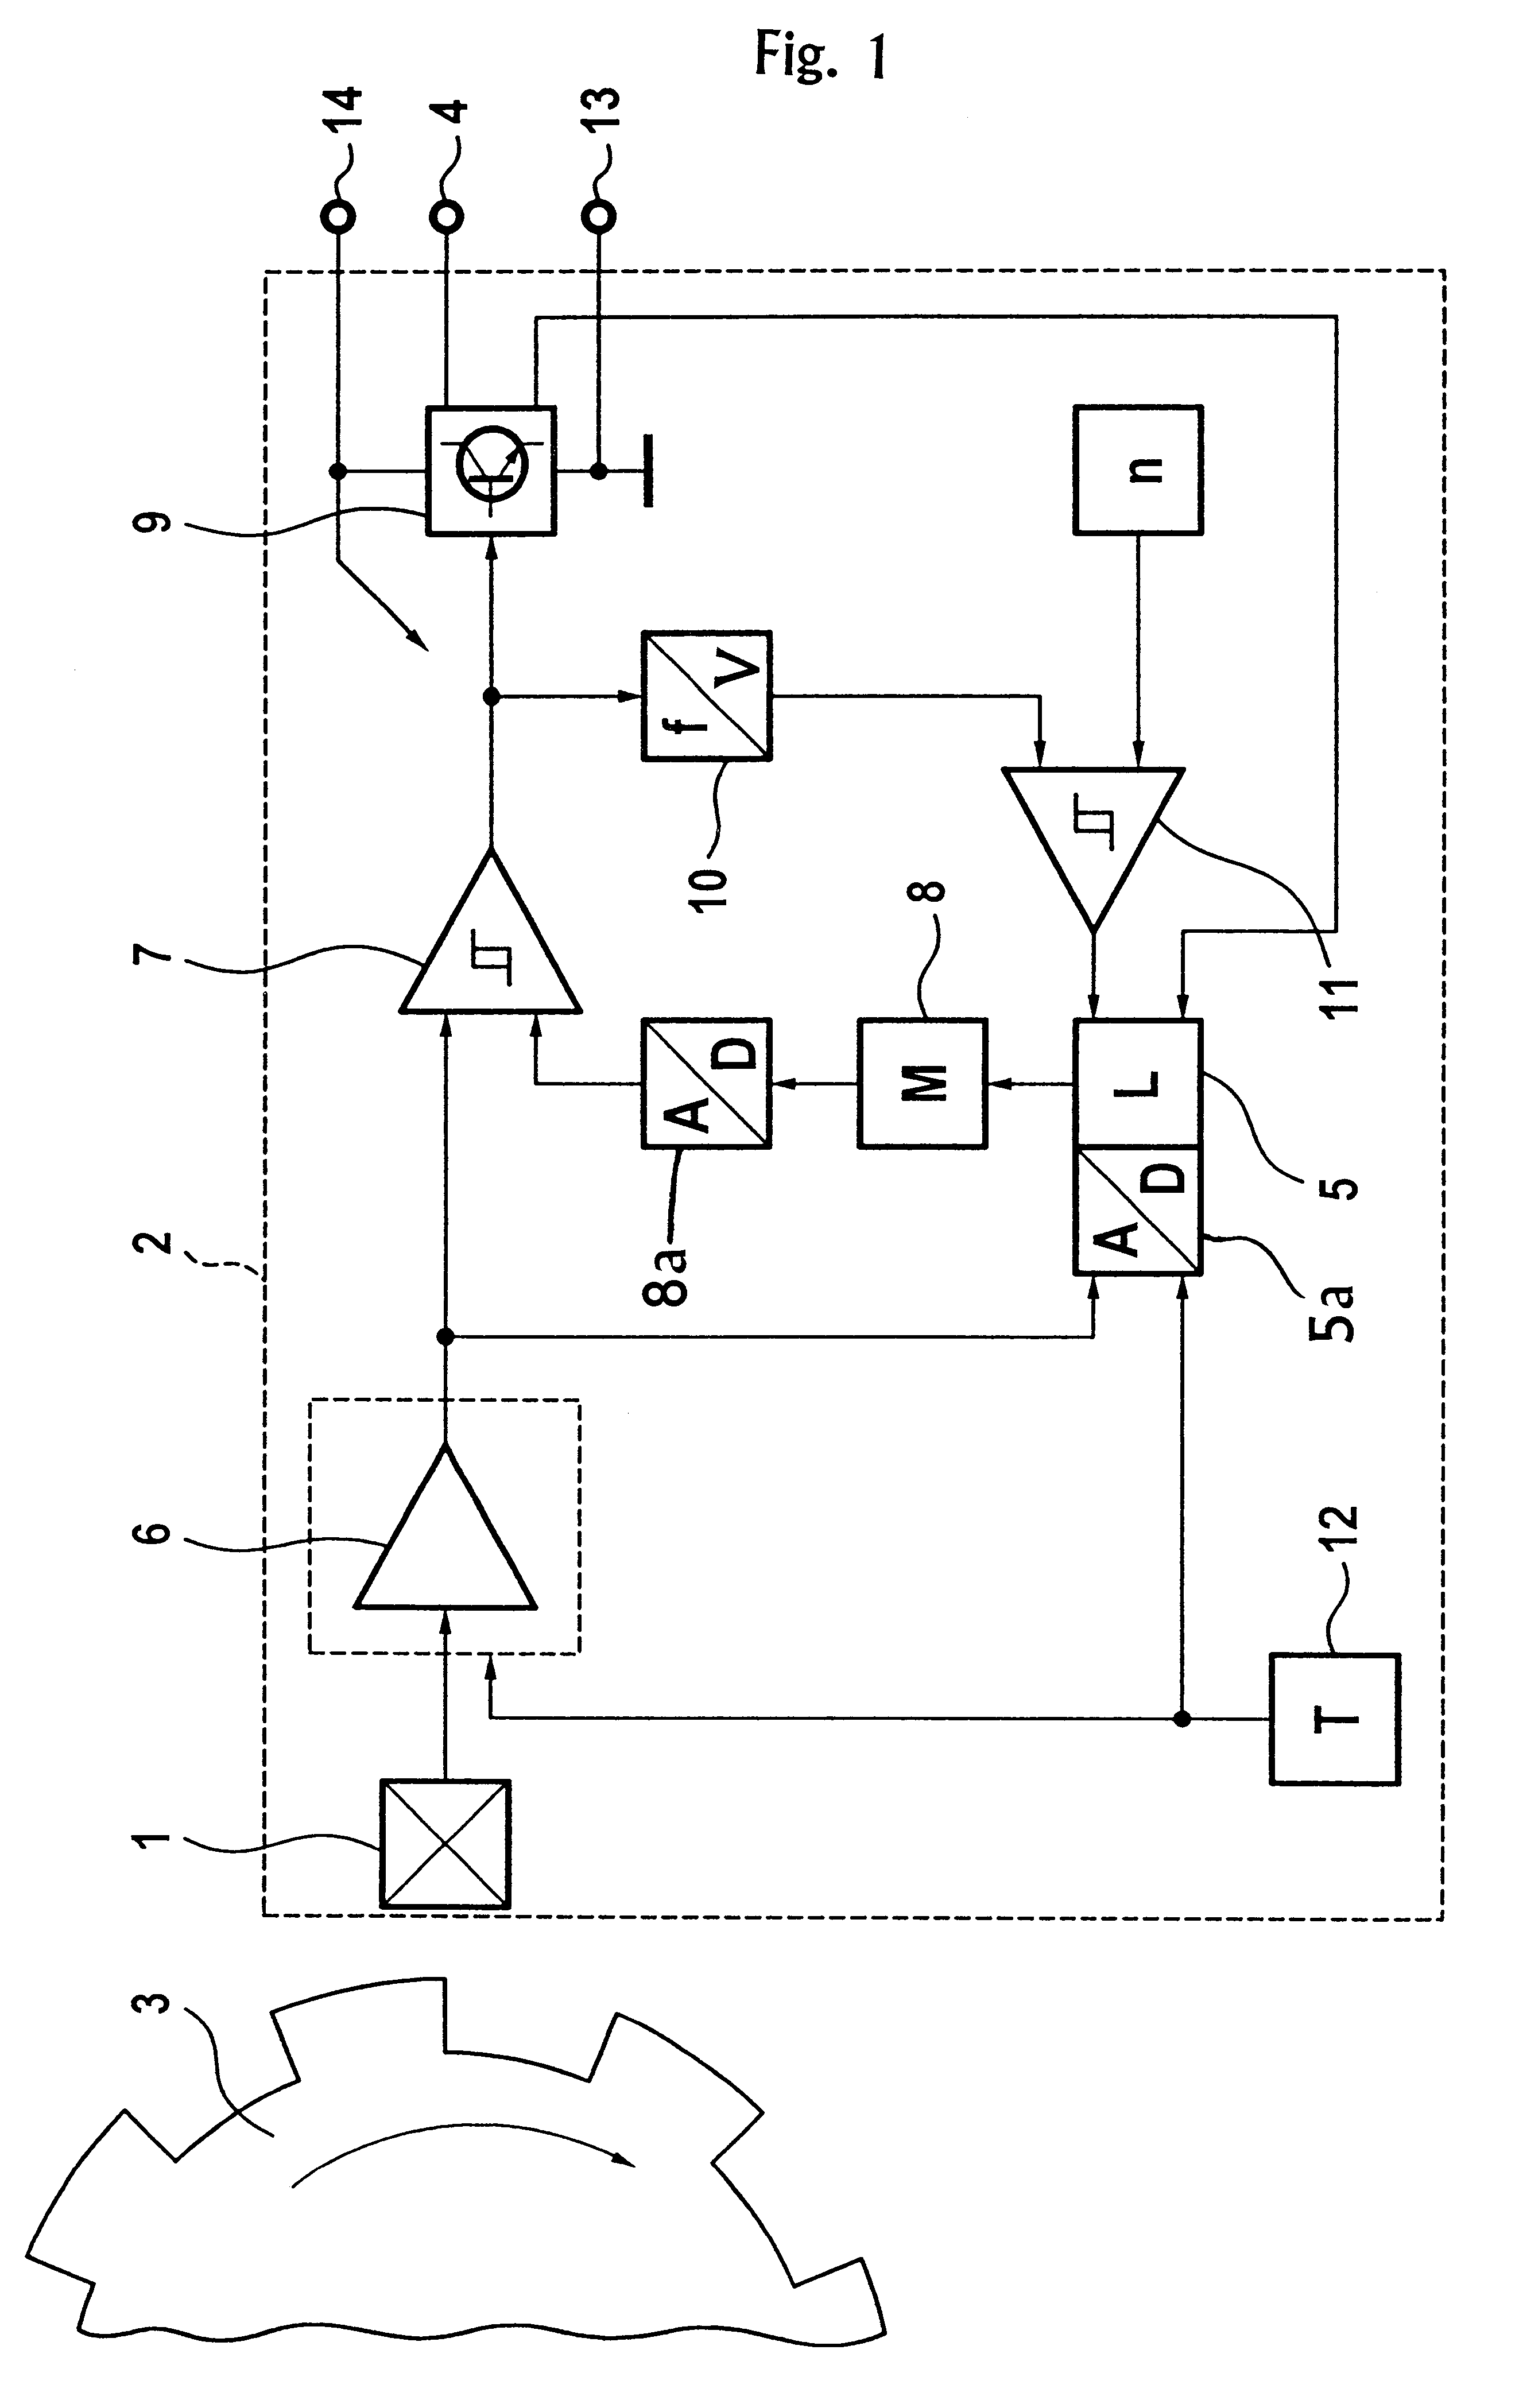 Self-adaptive sensor unit for determining pulse switching points